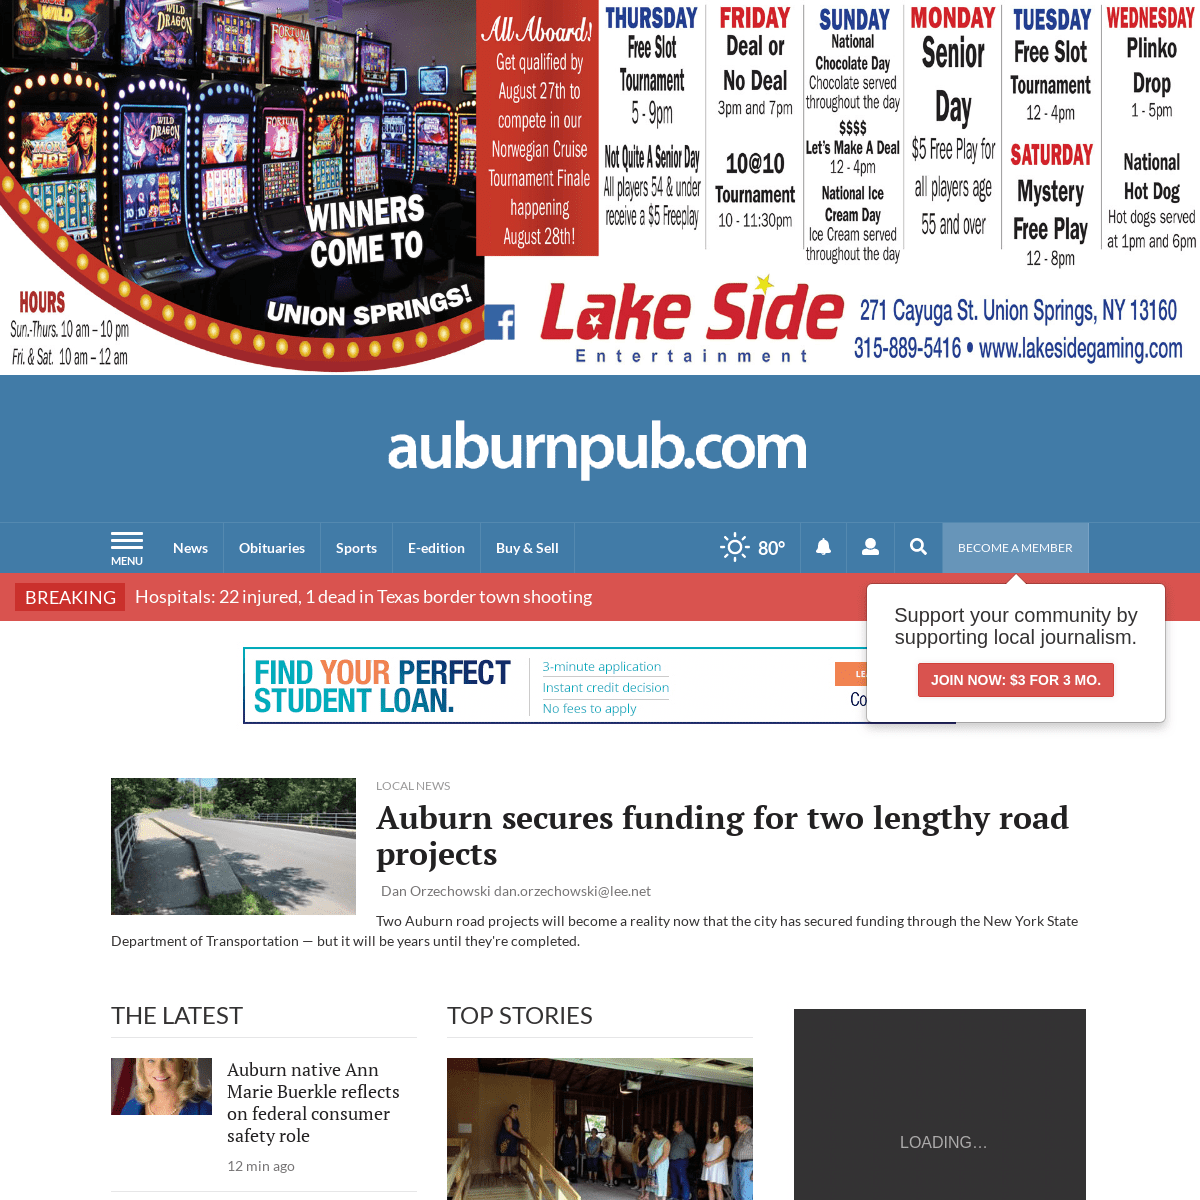 Auburnpub.com | Your number one source for Auburn and Cayuga County news | Since 1816, The News That Hits Home